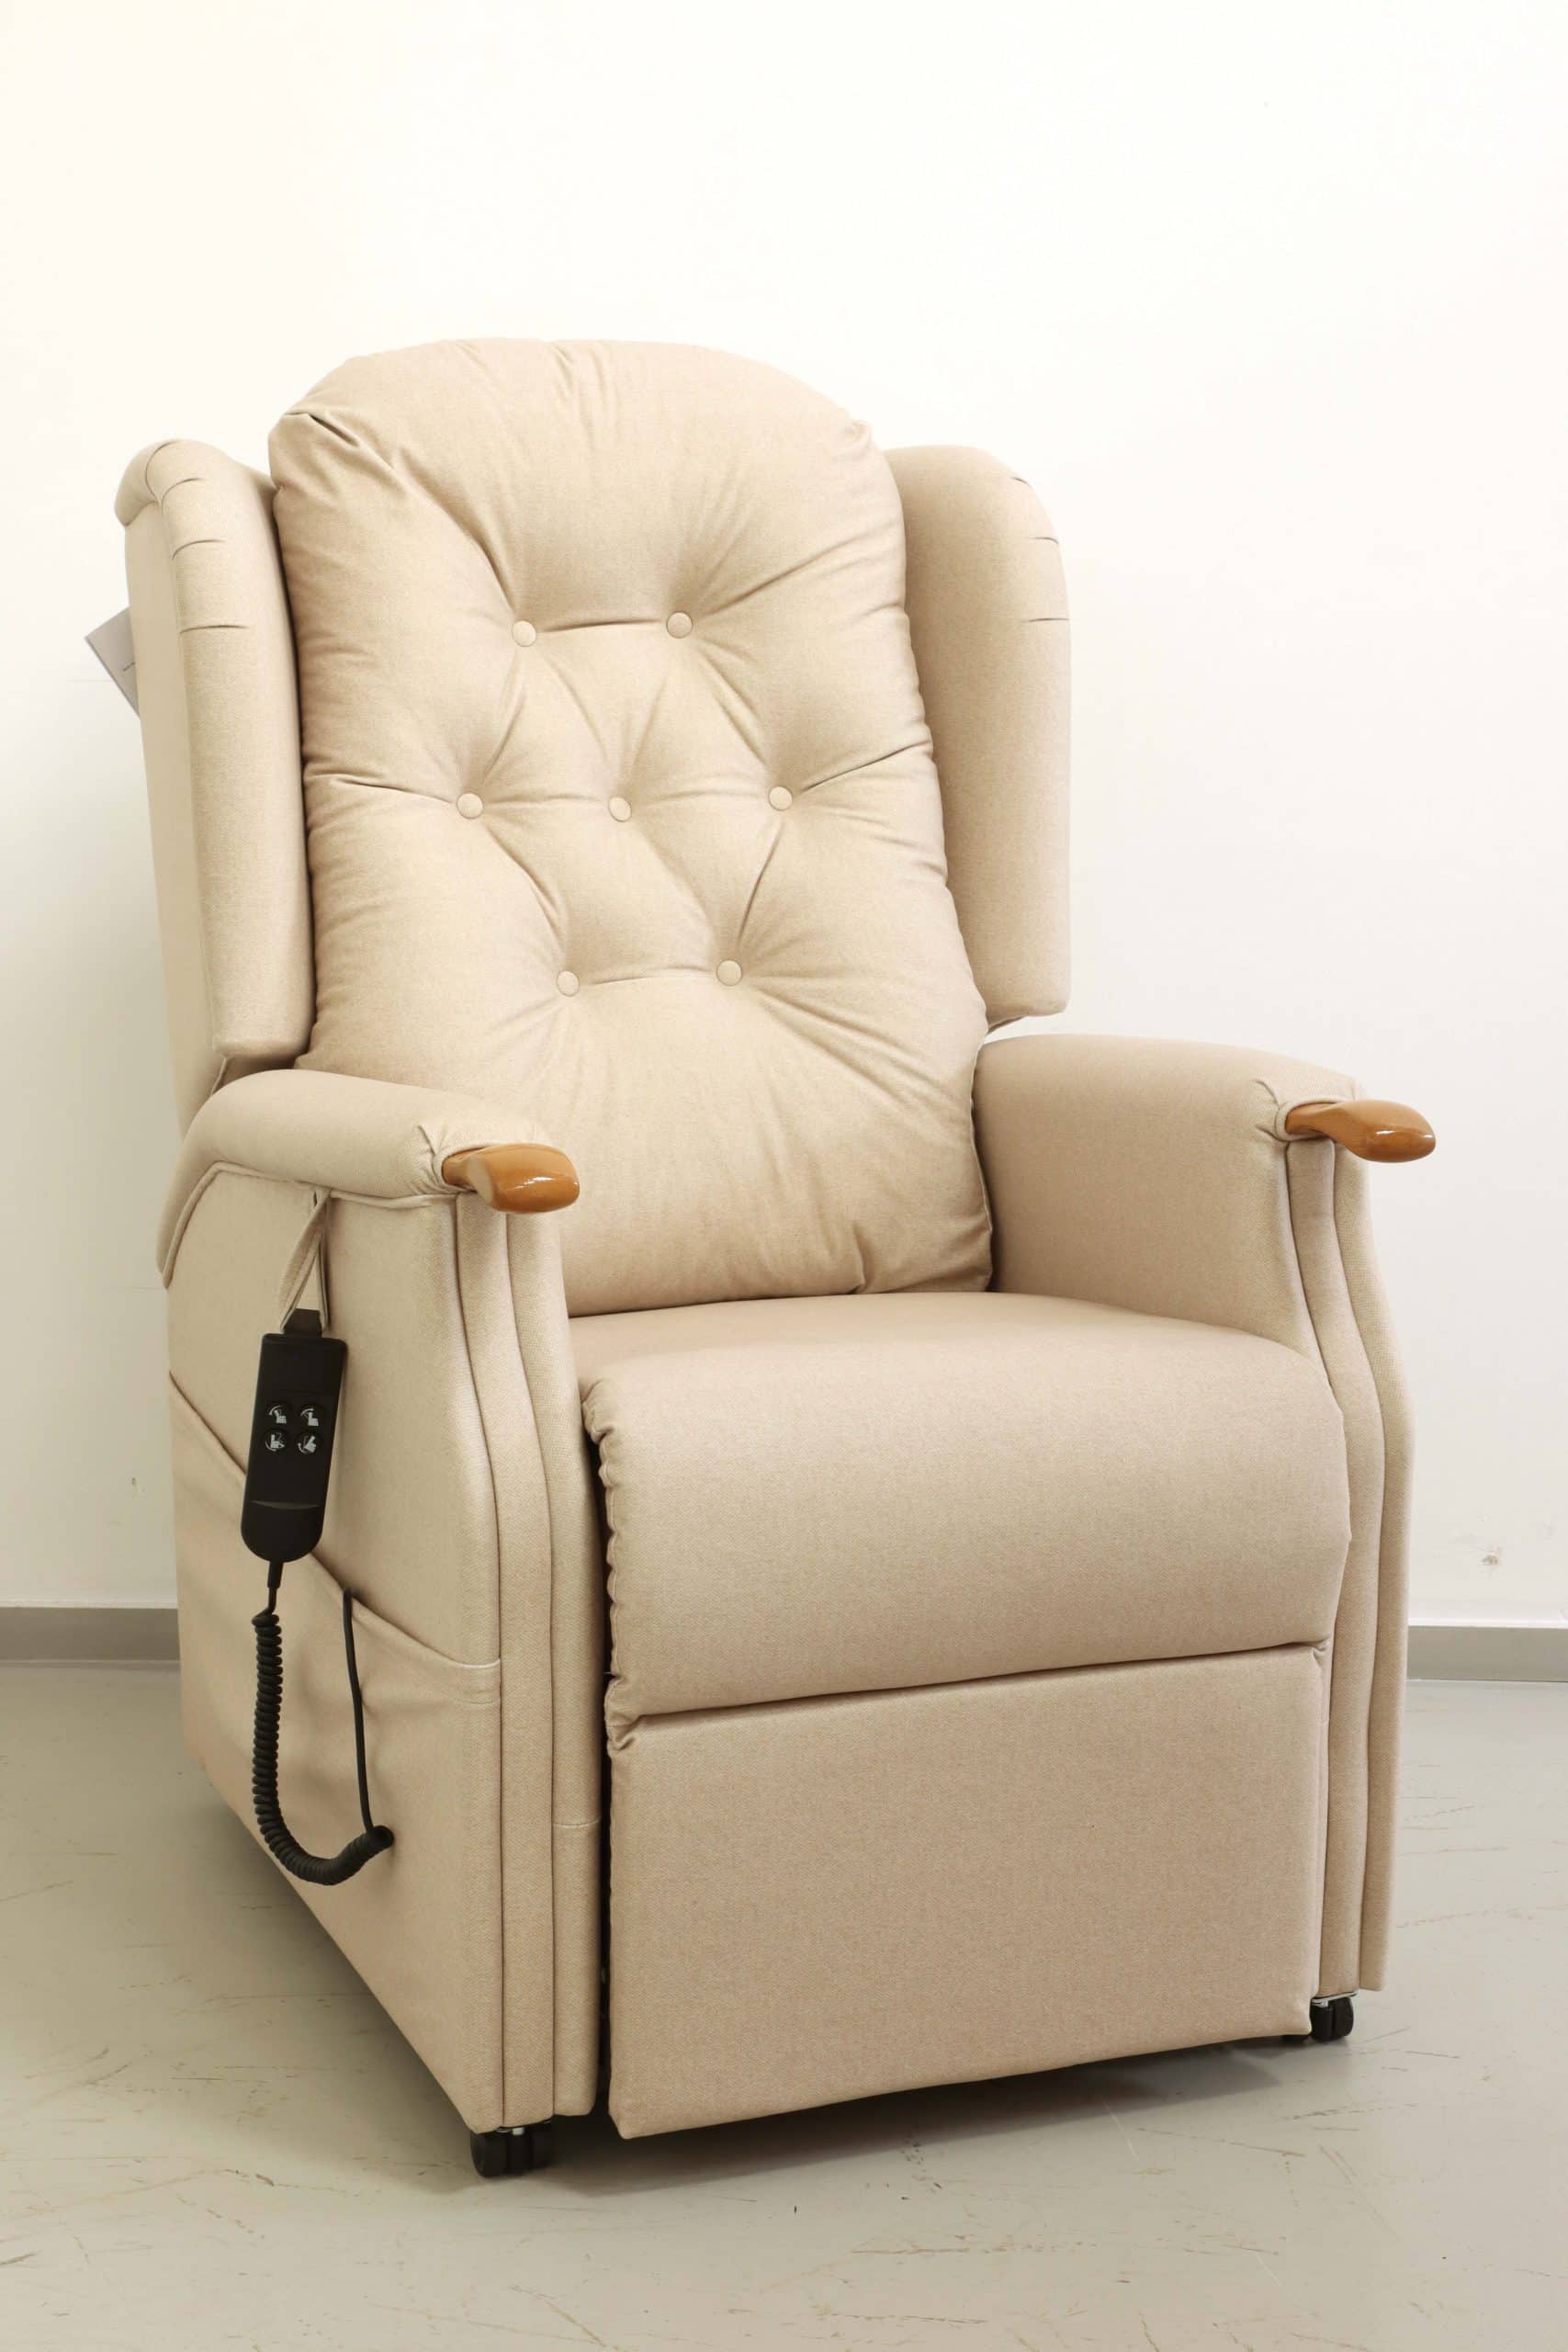 Made to measure riser recliner example